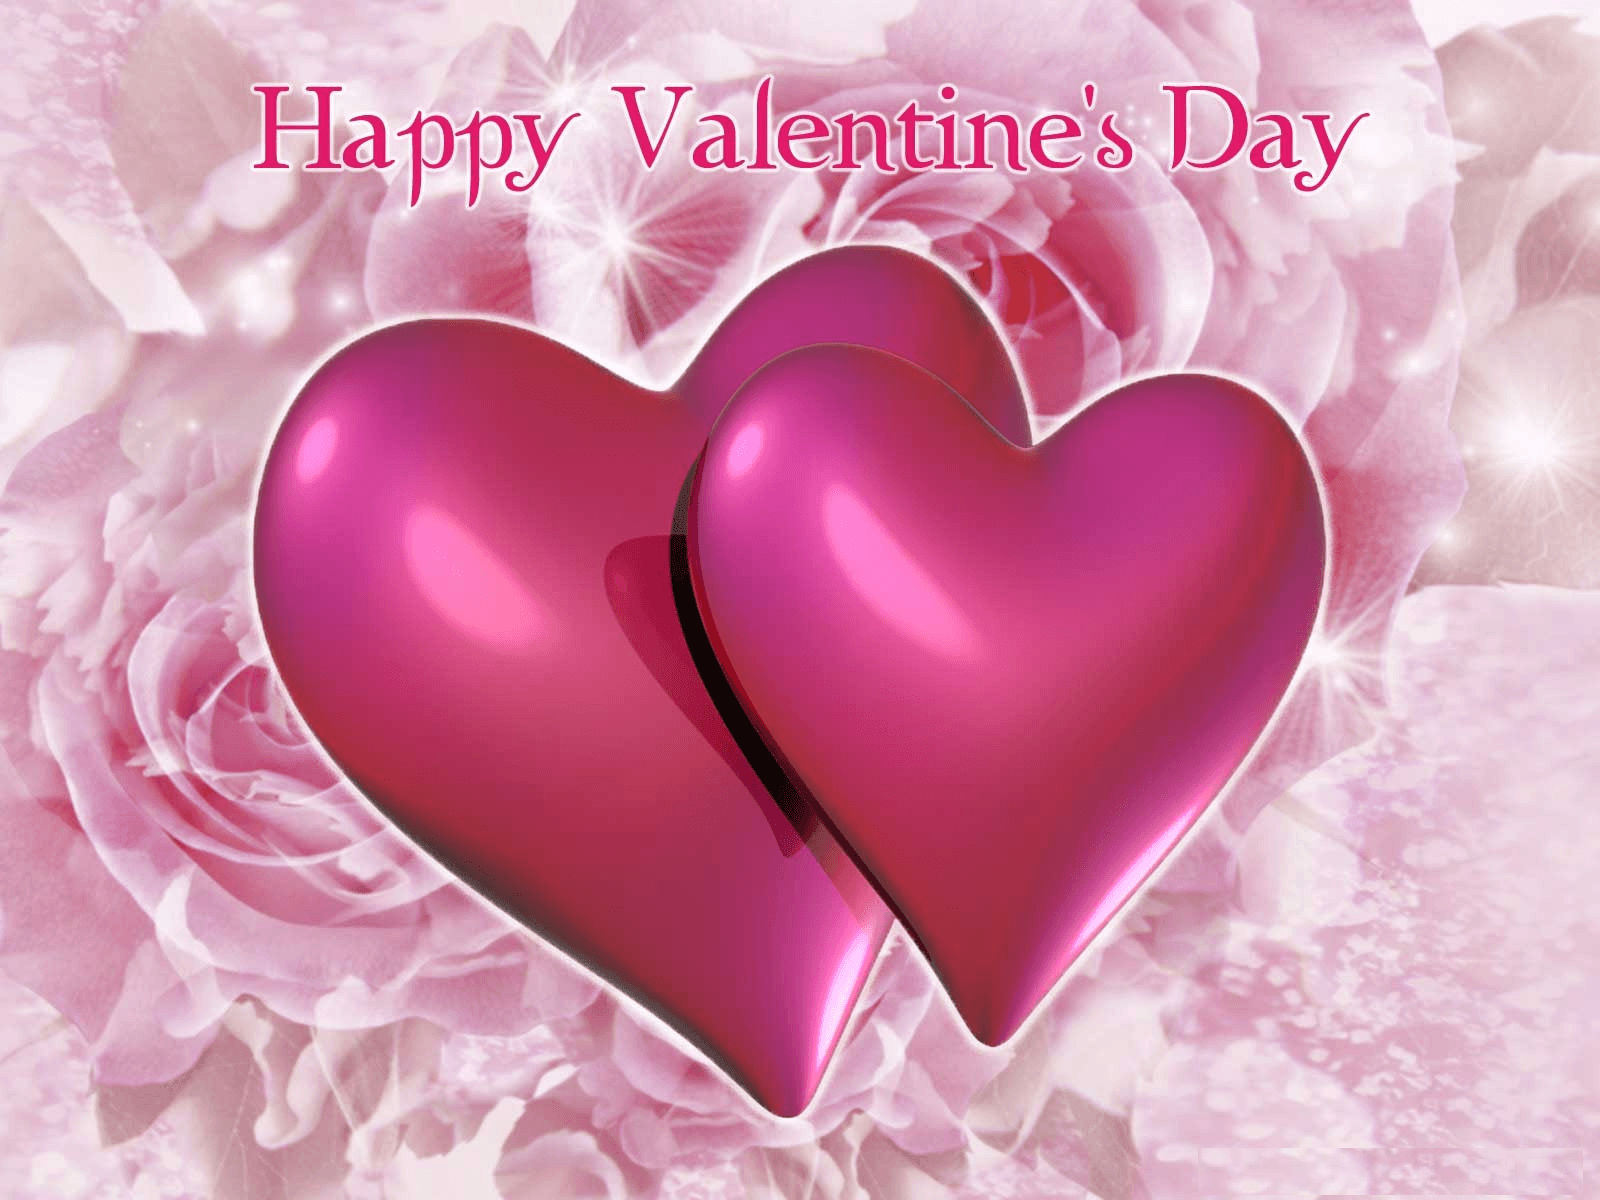 Valentines Day Image for Whatsapp DP, Profile Wallpaper